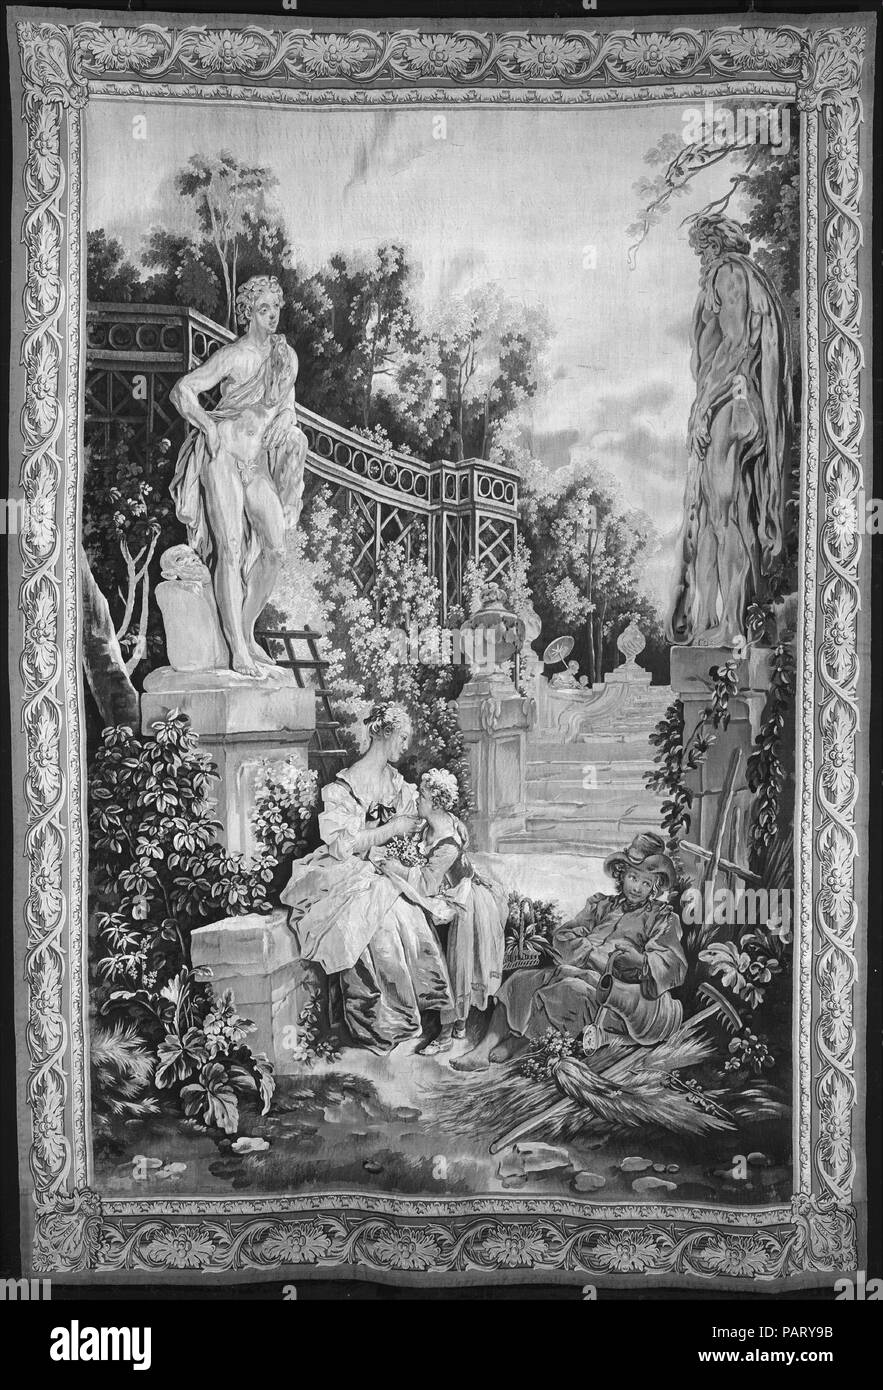 The Gardener from a set of the Italian Village Scenes. Culture: French, Beauvais. Designer: Designed by François Boucher (French, Paris 1703-1770 Paris). Dimensions: H. 110 1/2 x W. 73 inches (280.7 x 185.4 cm). Manufactory: Beauvais. Patron: Boulard de Gatellier (Château de Gatellier (Loire)). Workshop director: André Charlemagne Charron (French, active 1754-80). Date: designed 1734-36, woven 1762.  Images of gardens were popular in the tapestry medium from the medieval era, where the so-called mille-fleurs (thousand flowers) (see also 2013.506) provided a decorative, and sometimes symbolic,  Stock Photo